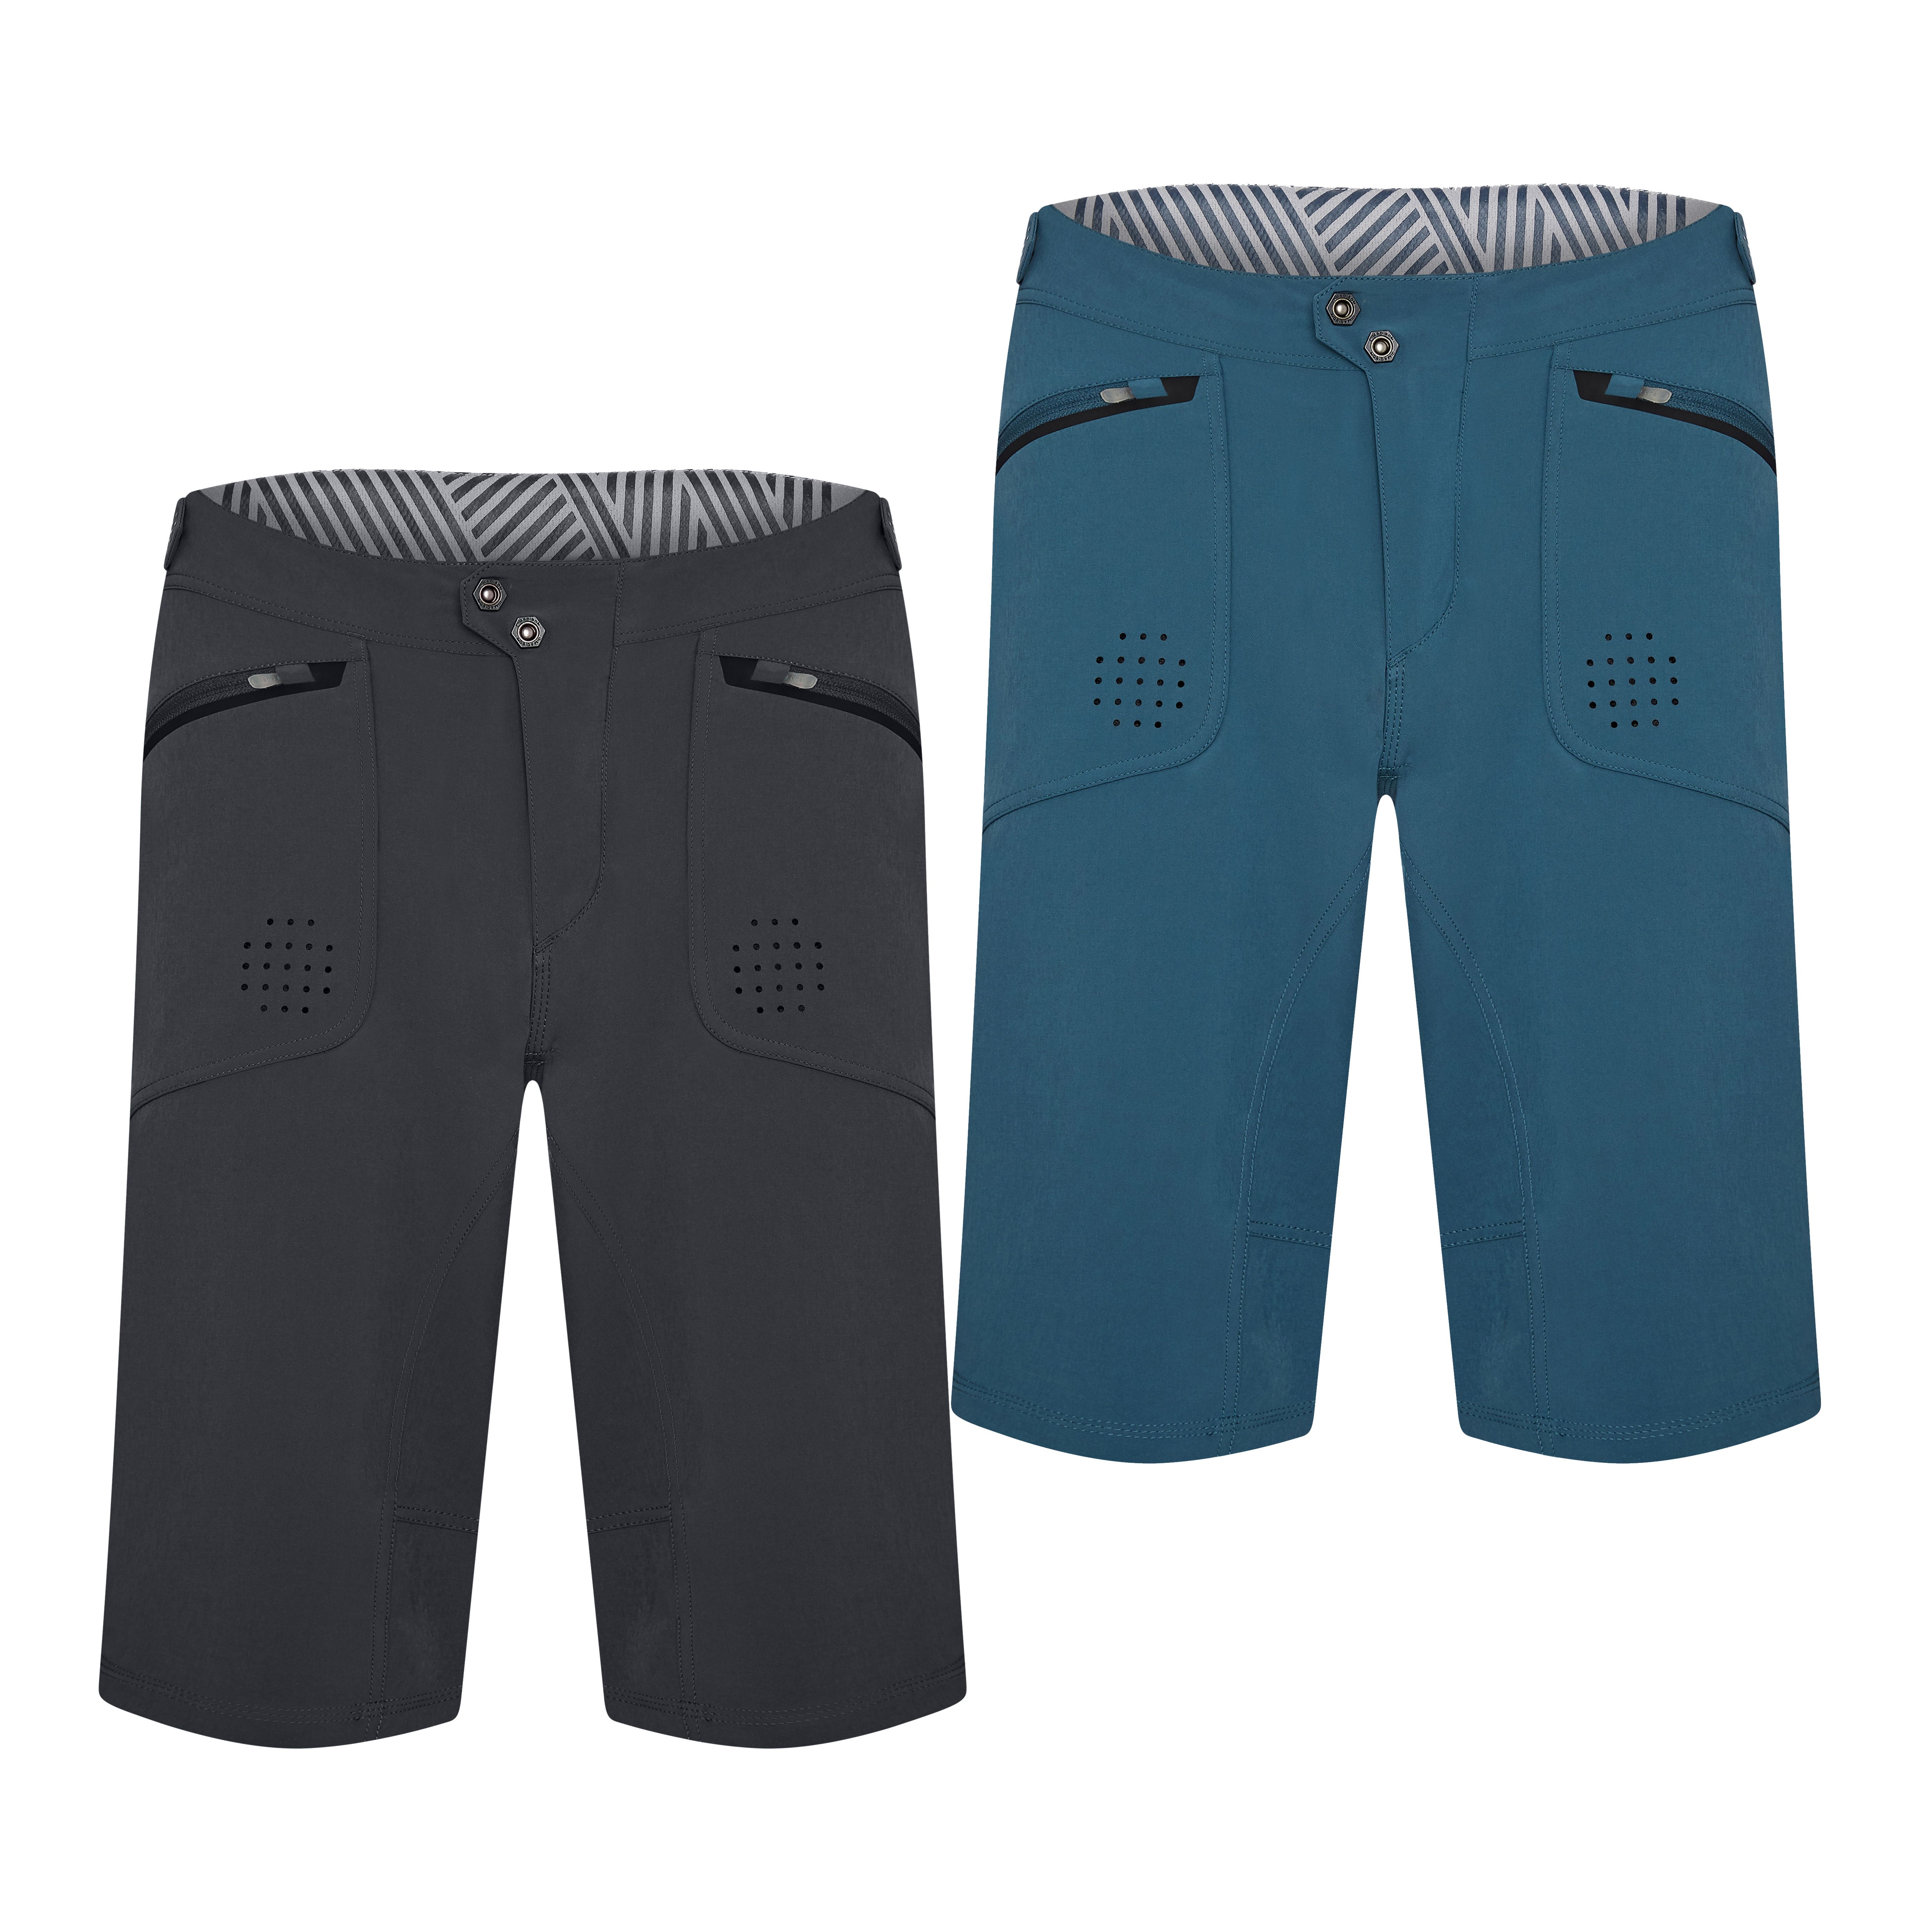 Madison Flux Mtb Shorts - Â£34.99 | Shorts - Baggy Loose Fit & 3/4s | Cyclestore